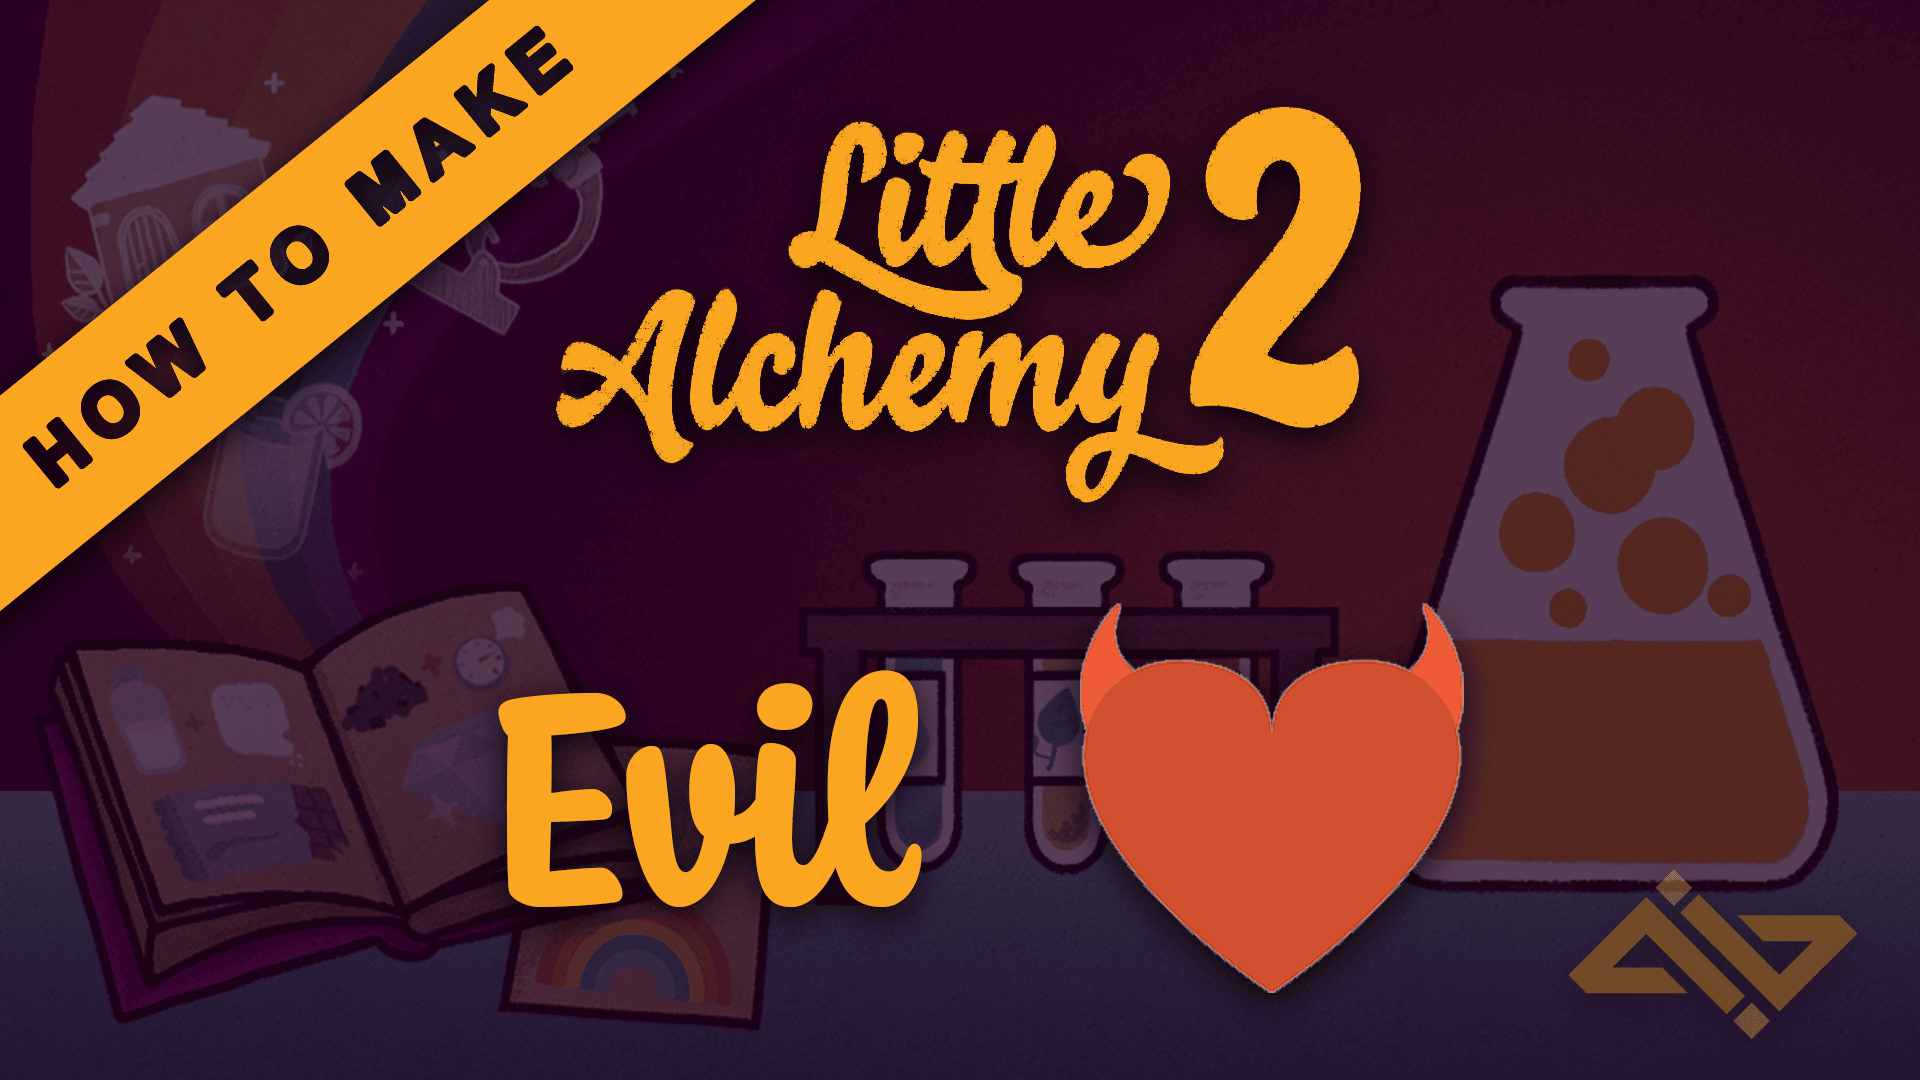 Little Alchemy 2: How To Make Heaven